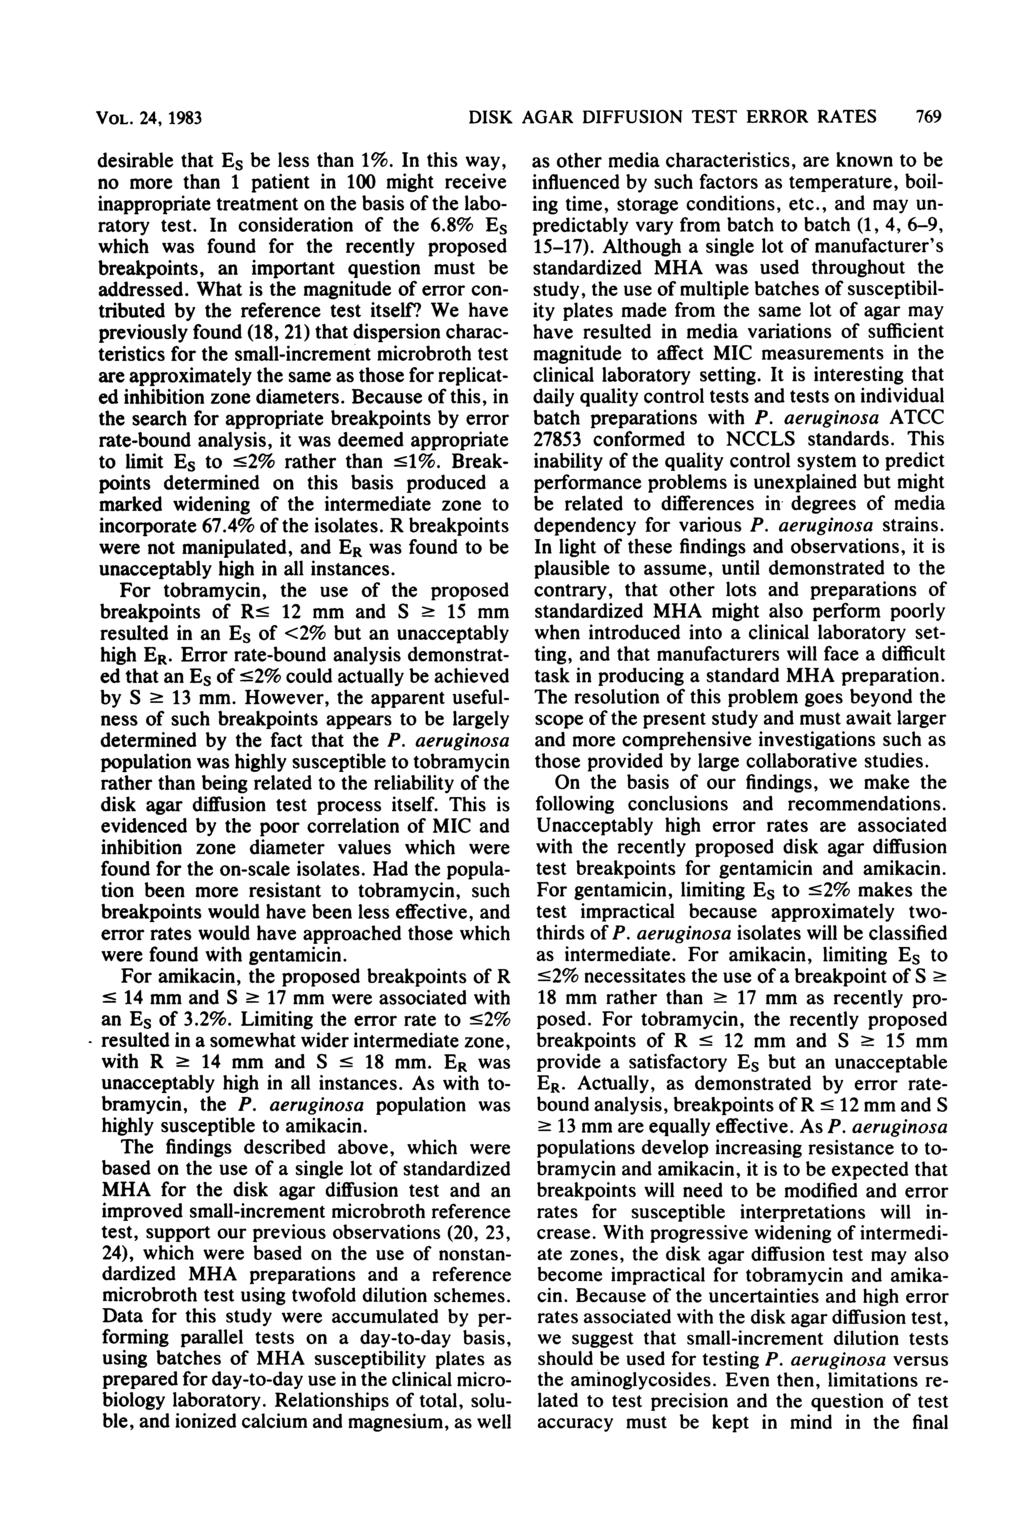 VOL. 24, 1983 desirable that Es be less than 1%. In this way, no more than 1 patient in 100 might receive inappropriate treatment on the basis of the laboratory test. In consideration of the 6.